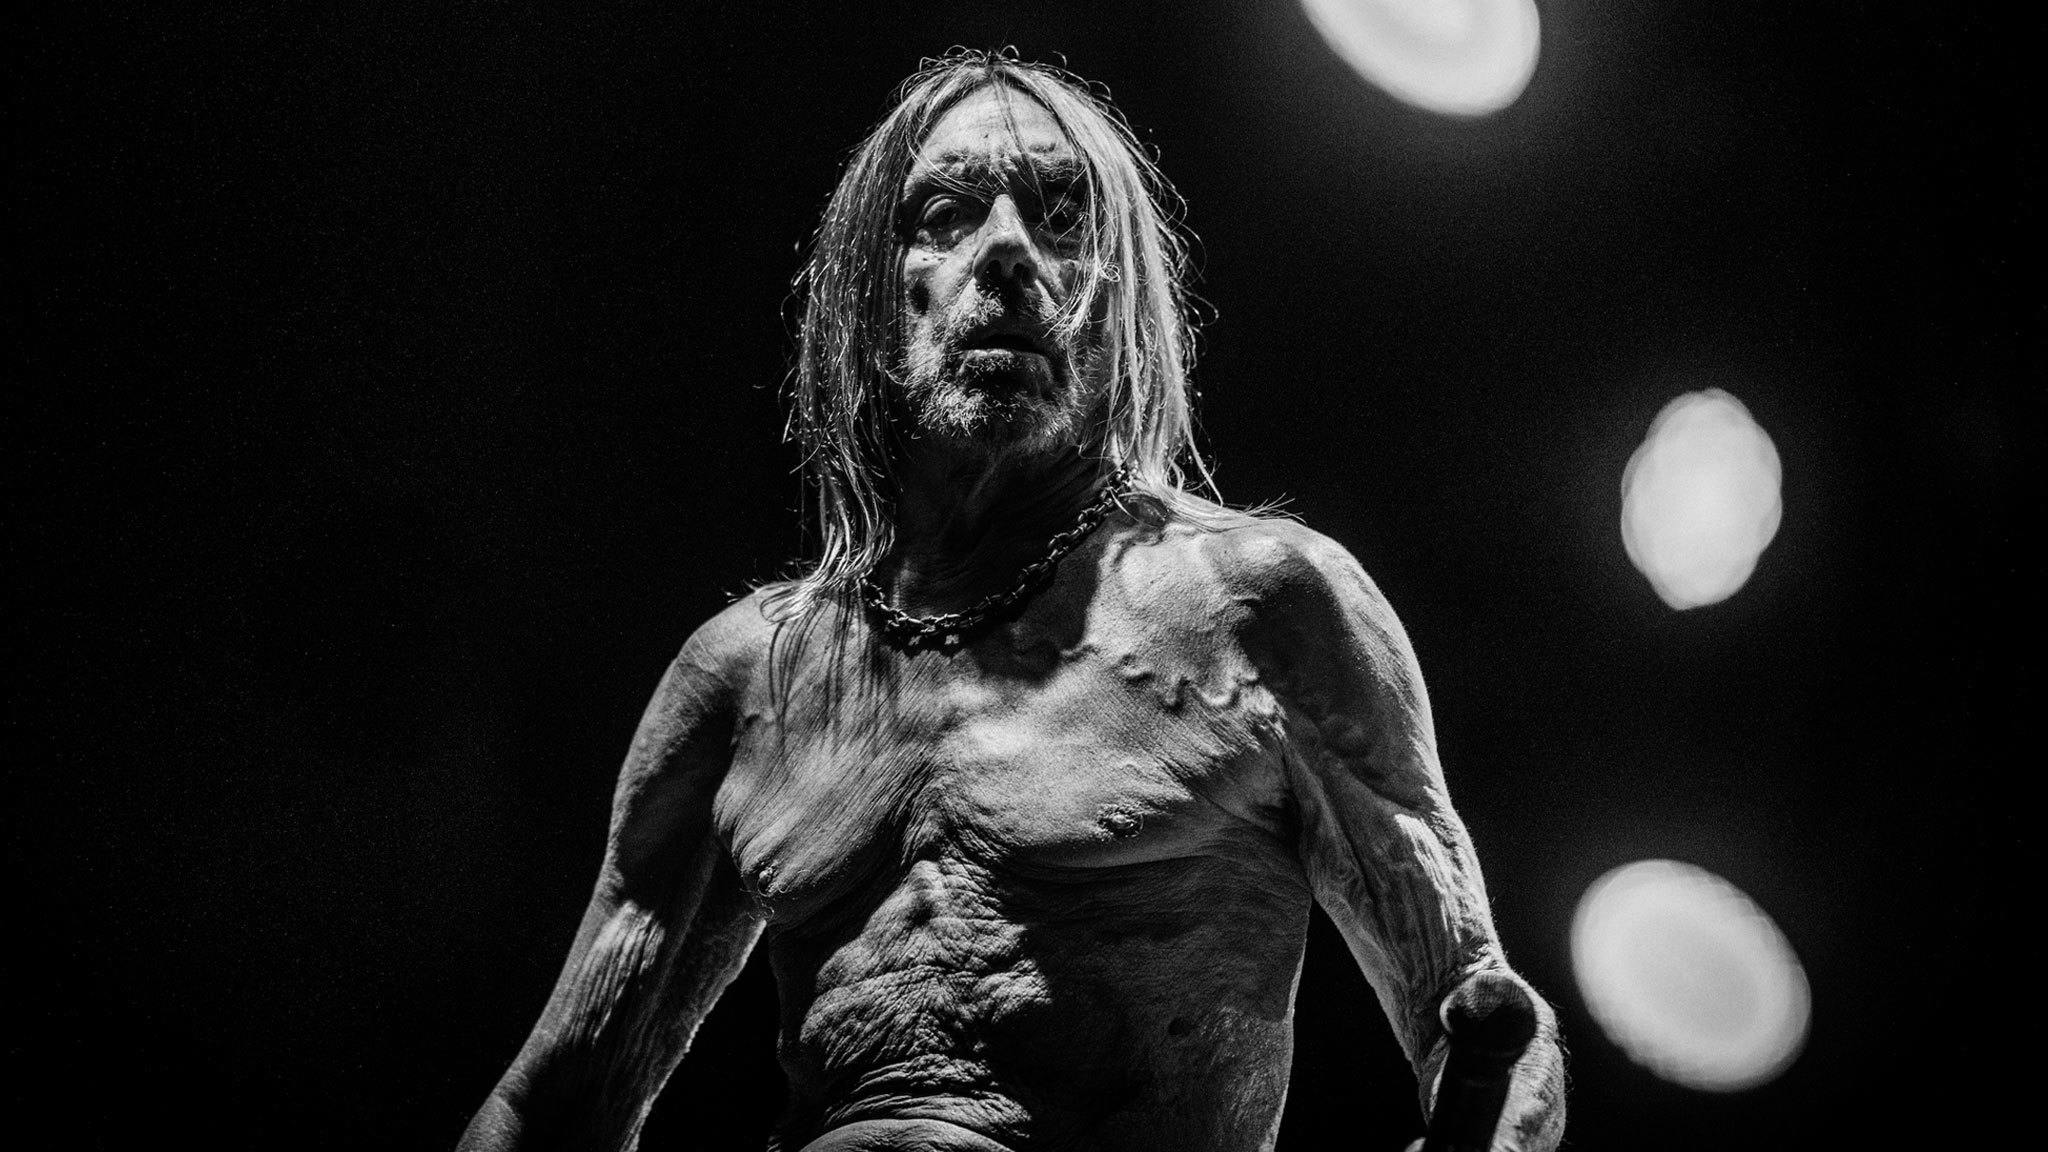 Iggy Pop teams up with Duff McKagan, Chad Smith for new single Frenzy